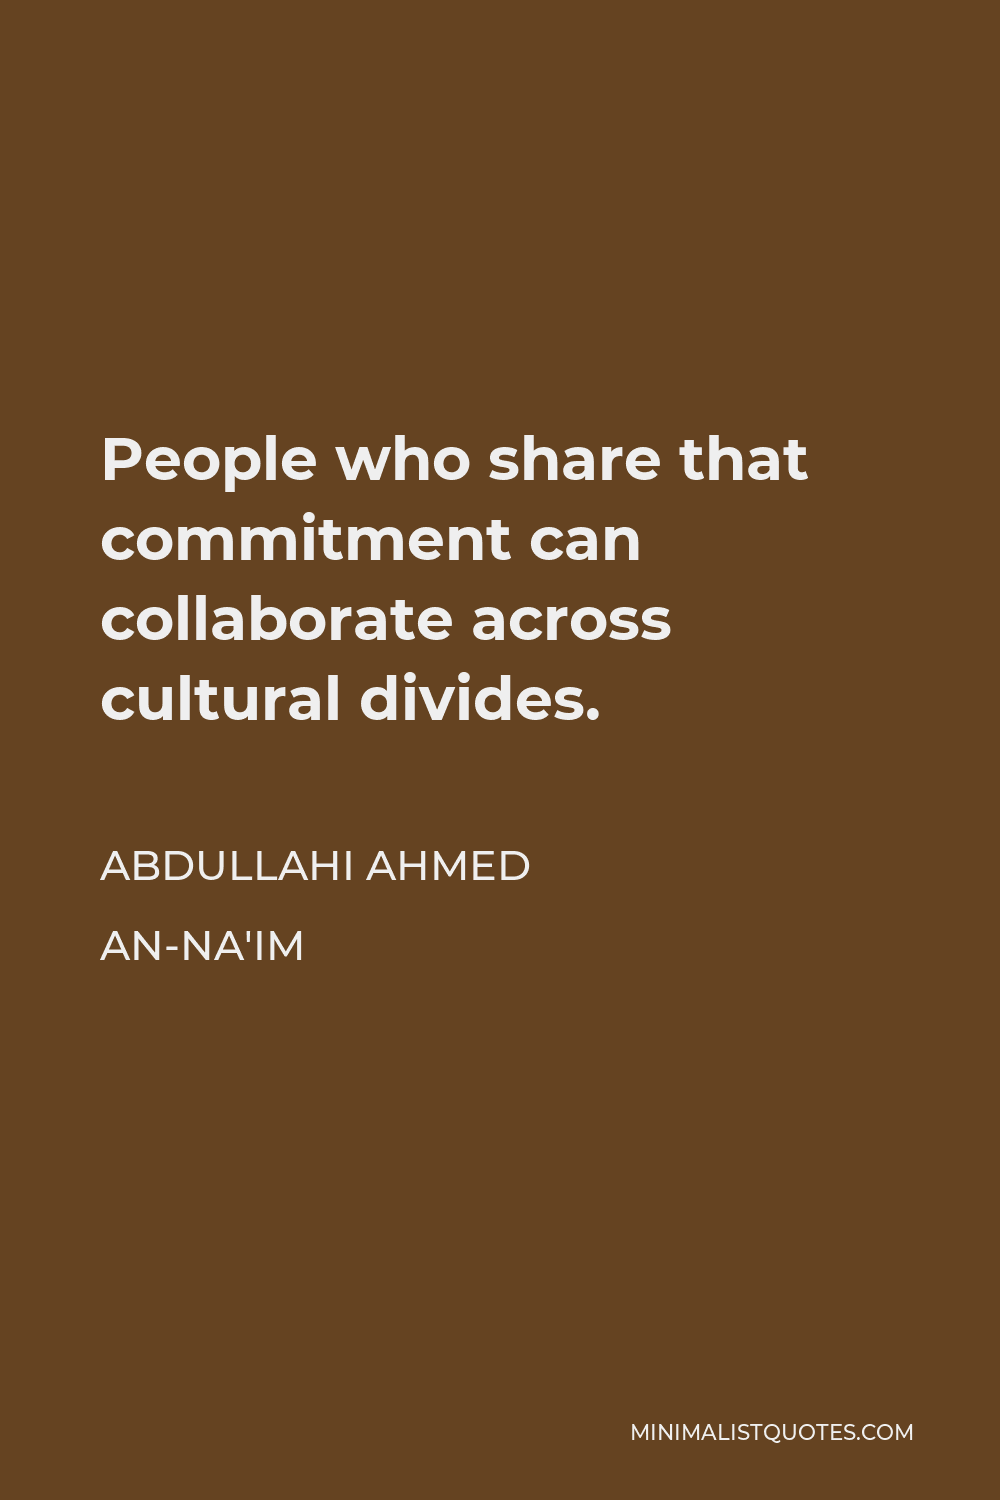 Abdullahi Ahmed An-Na'im Quote - People who share that commitment can collaborate across cultural divides.